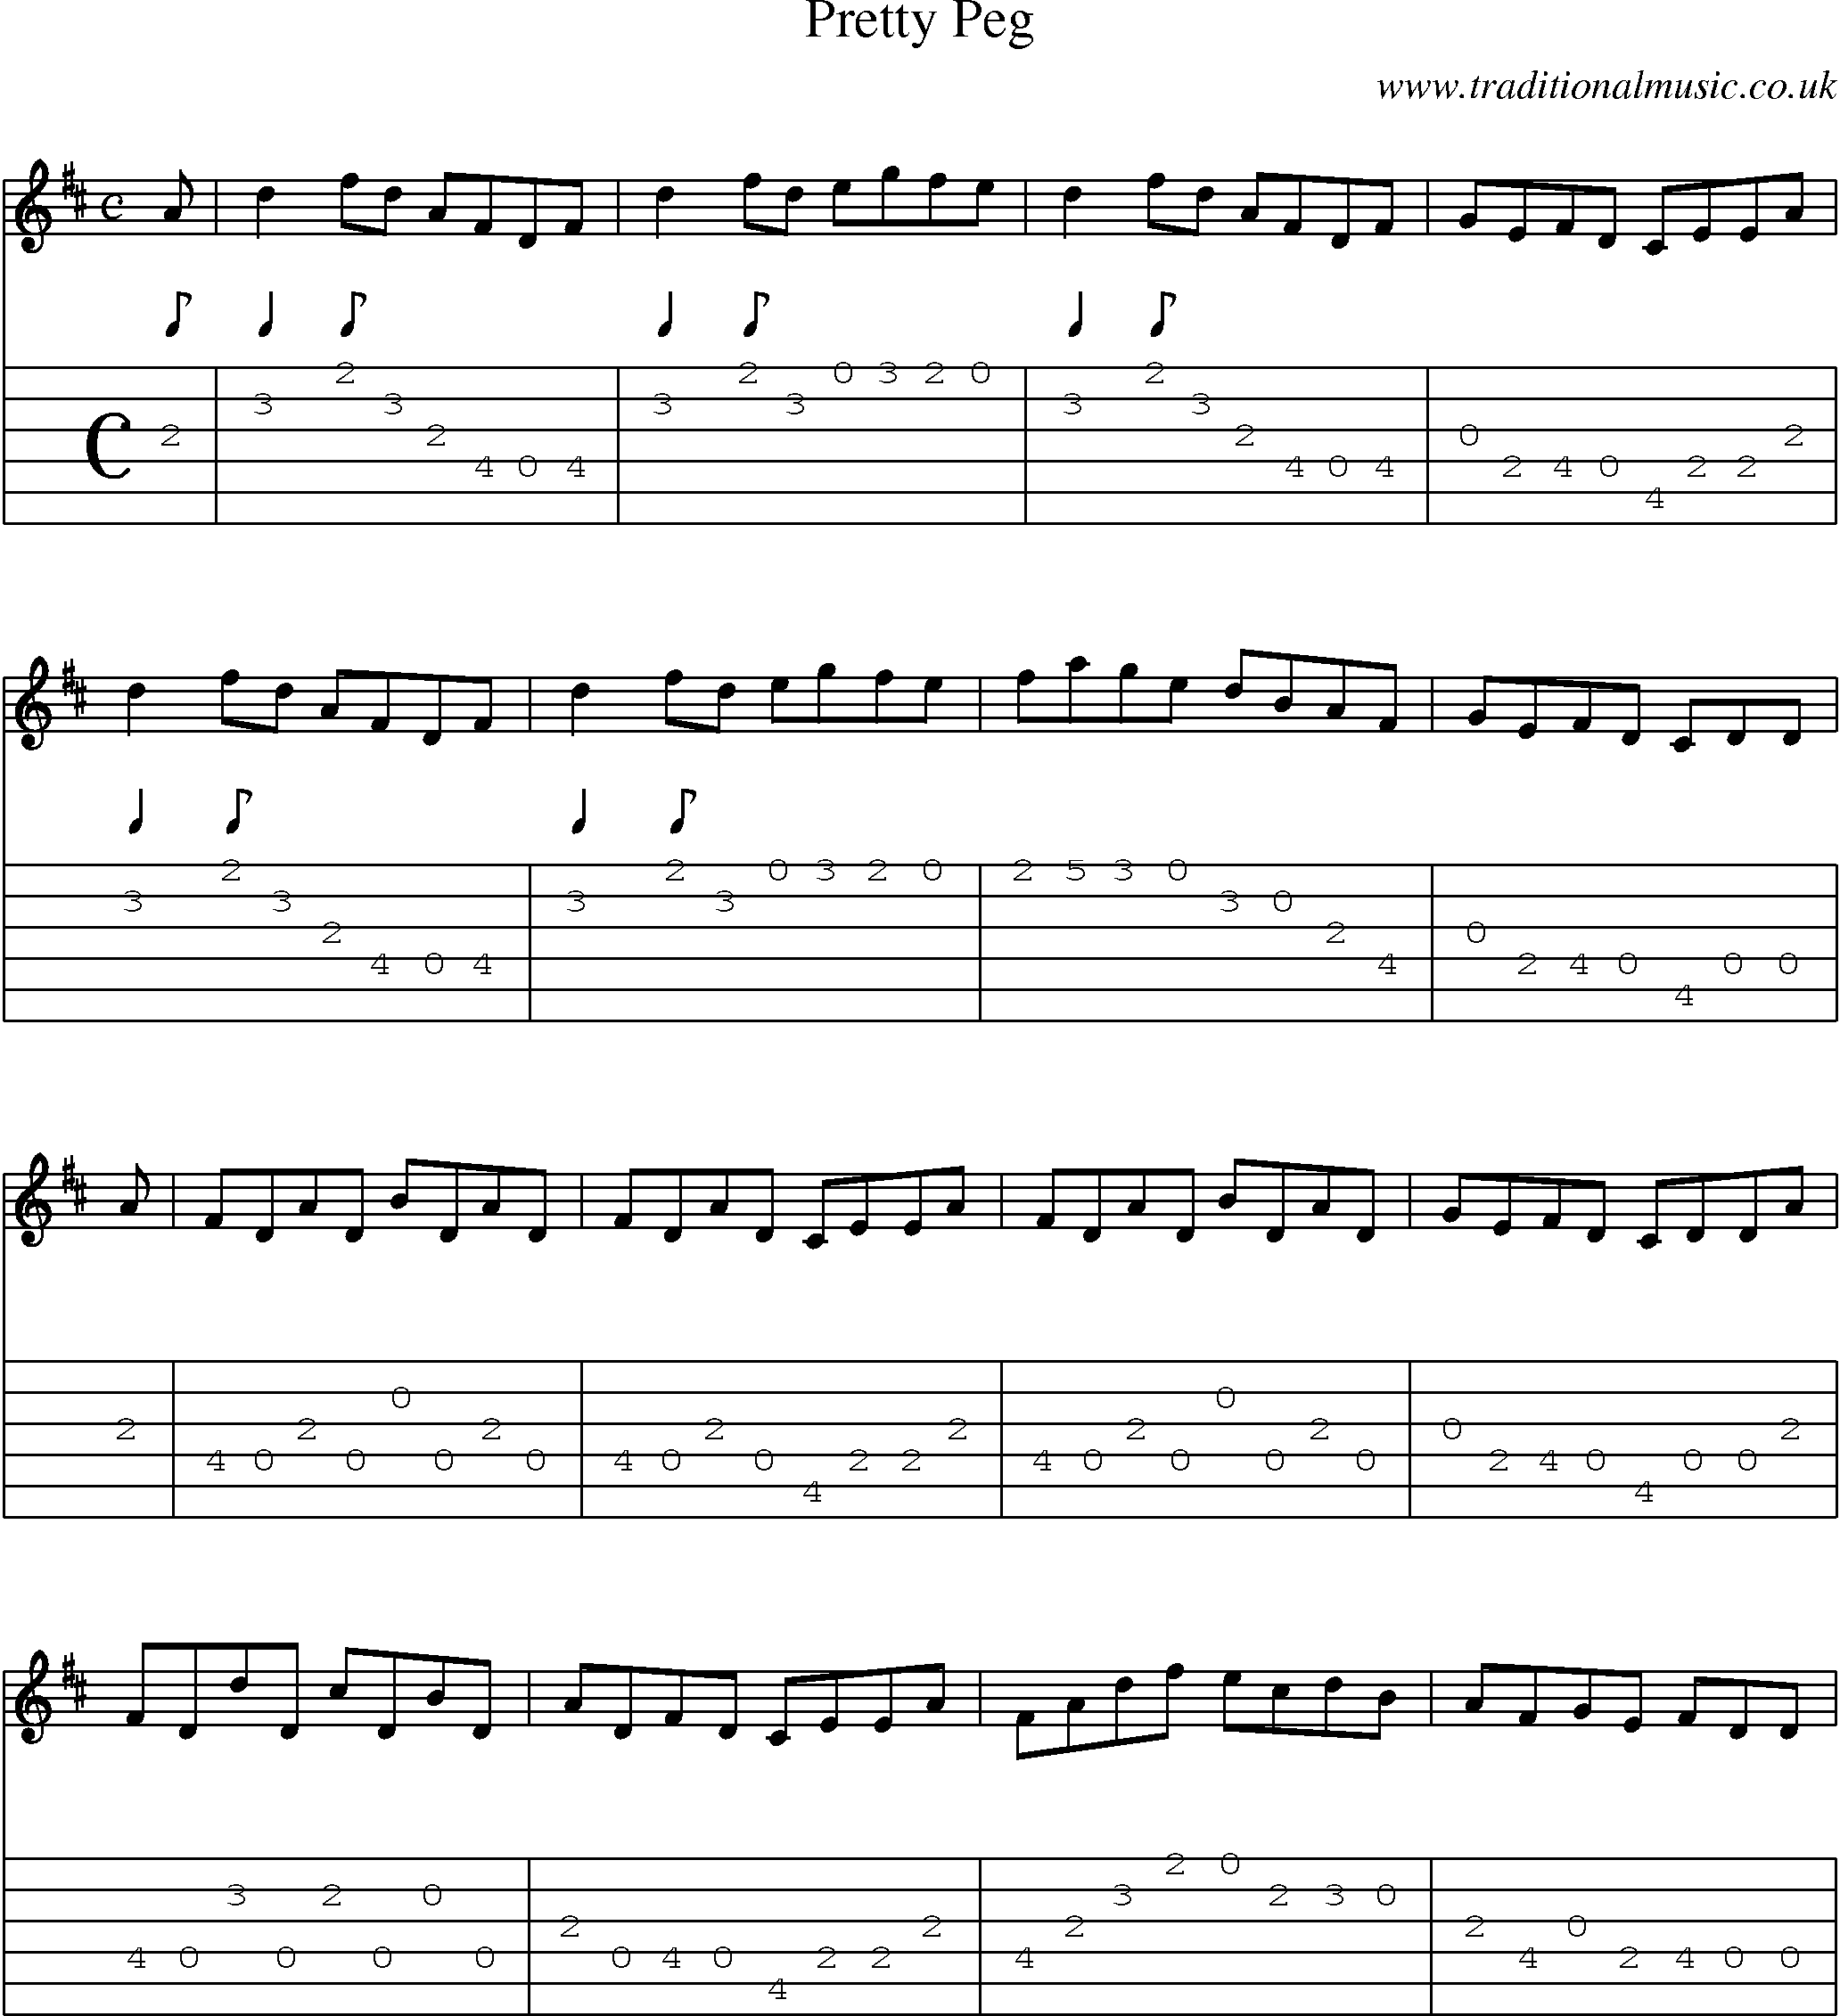 Music Score and Guitar Tabs for Pretty Peg